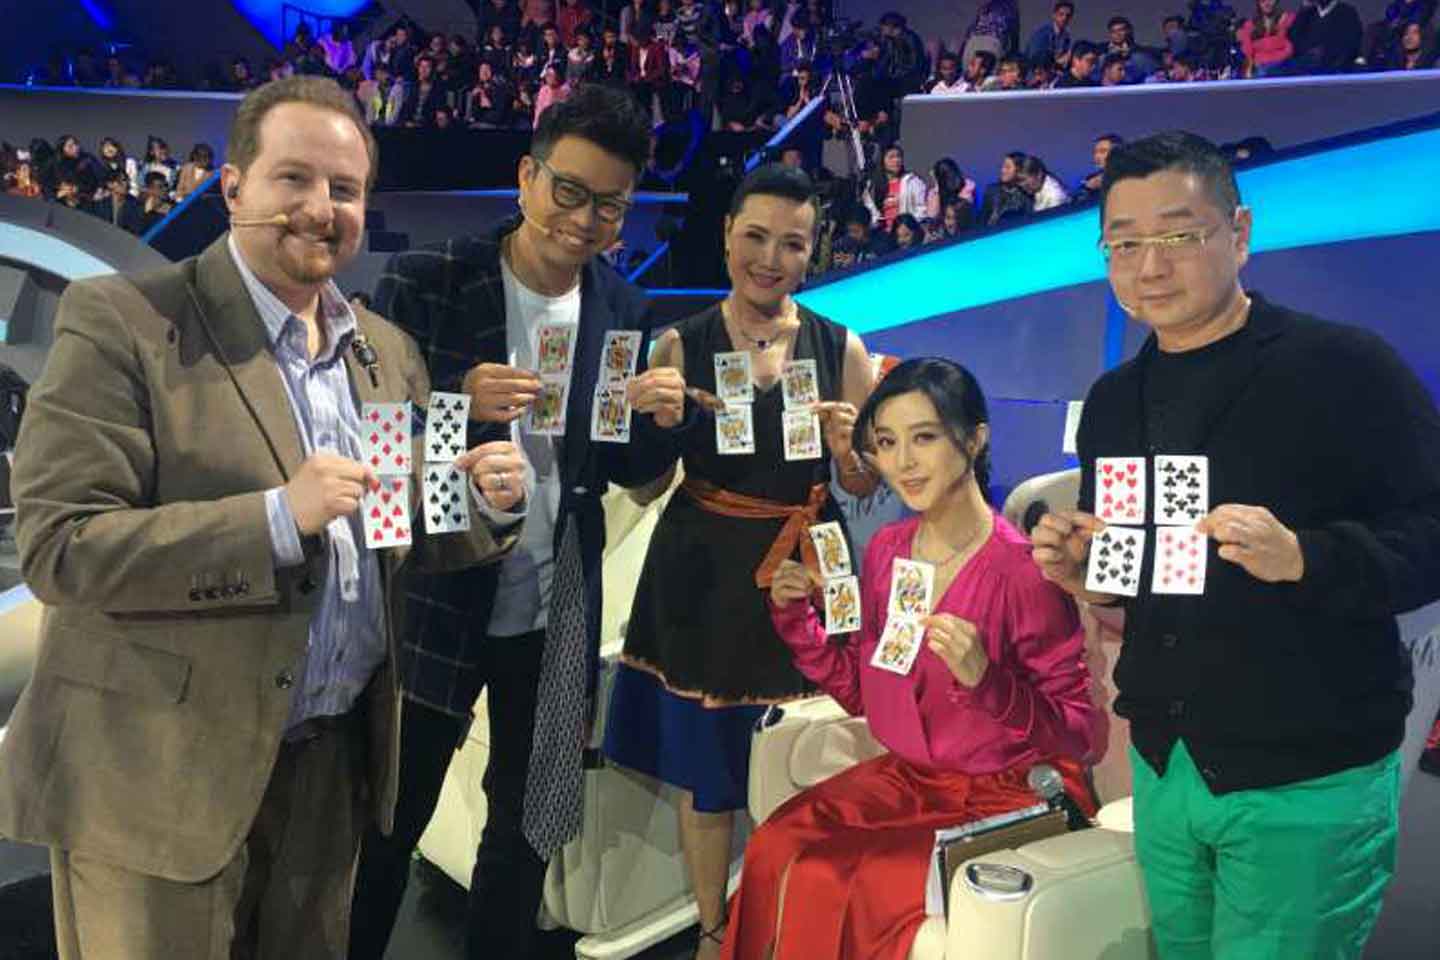 Fan Bing Bing and the rest of the celebrity judges performing Lee Asher's The Ripper